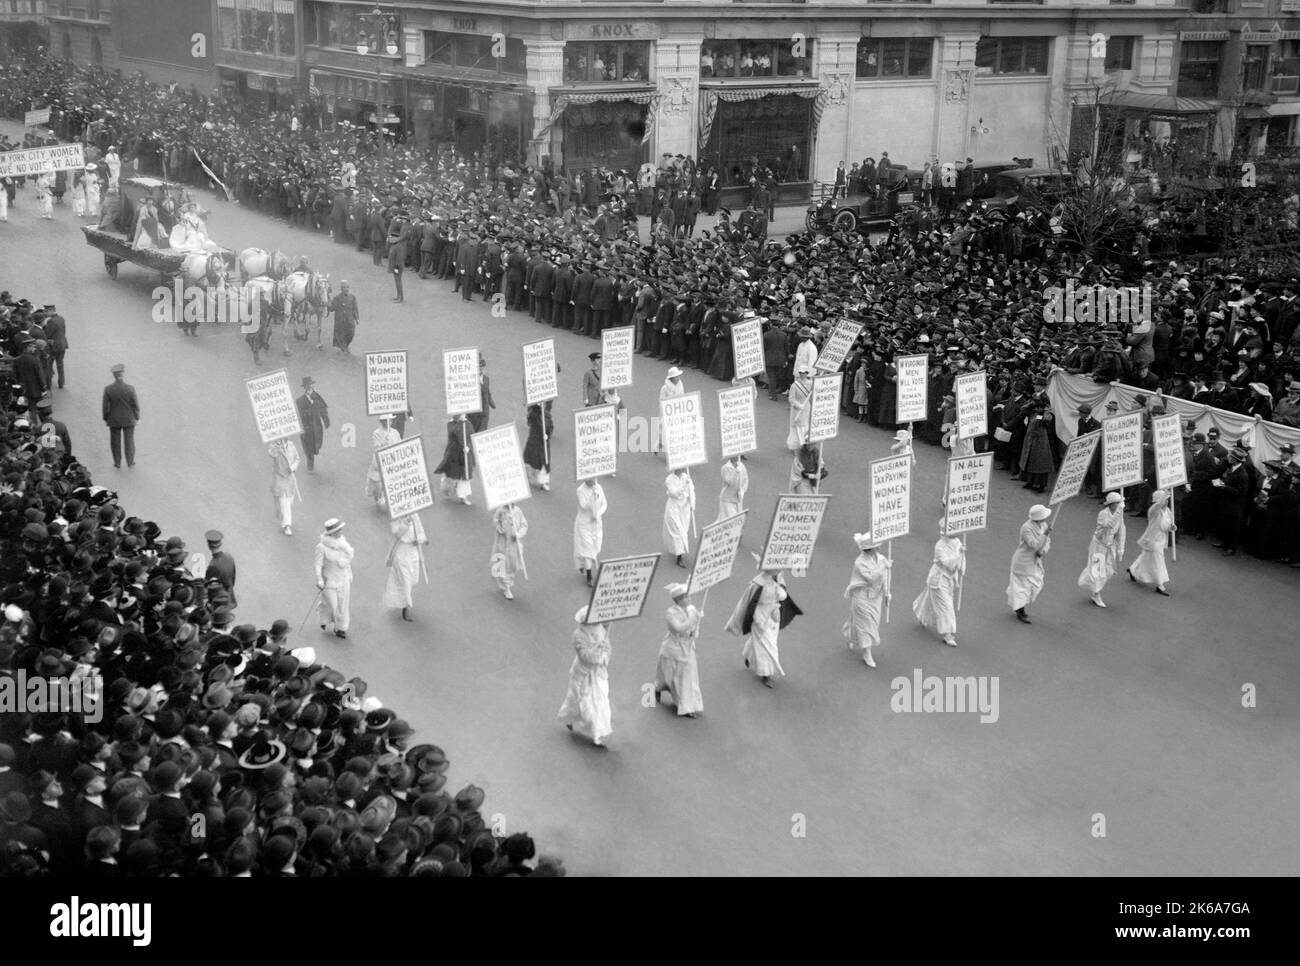 October 23, 1915 - Women's suffrage parade in New York City. Stock Photo